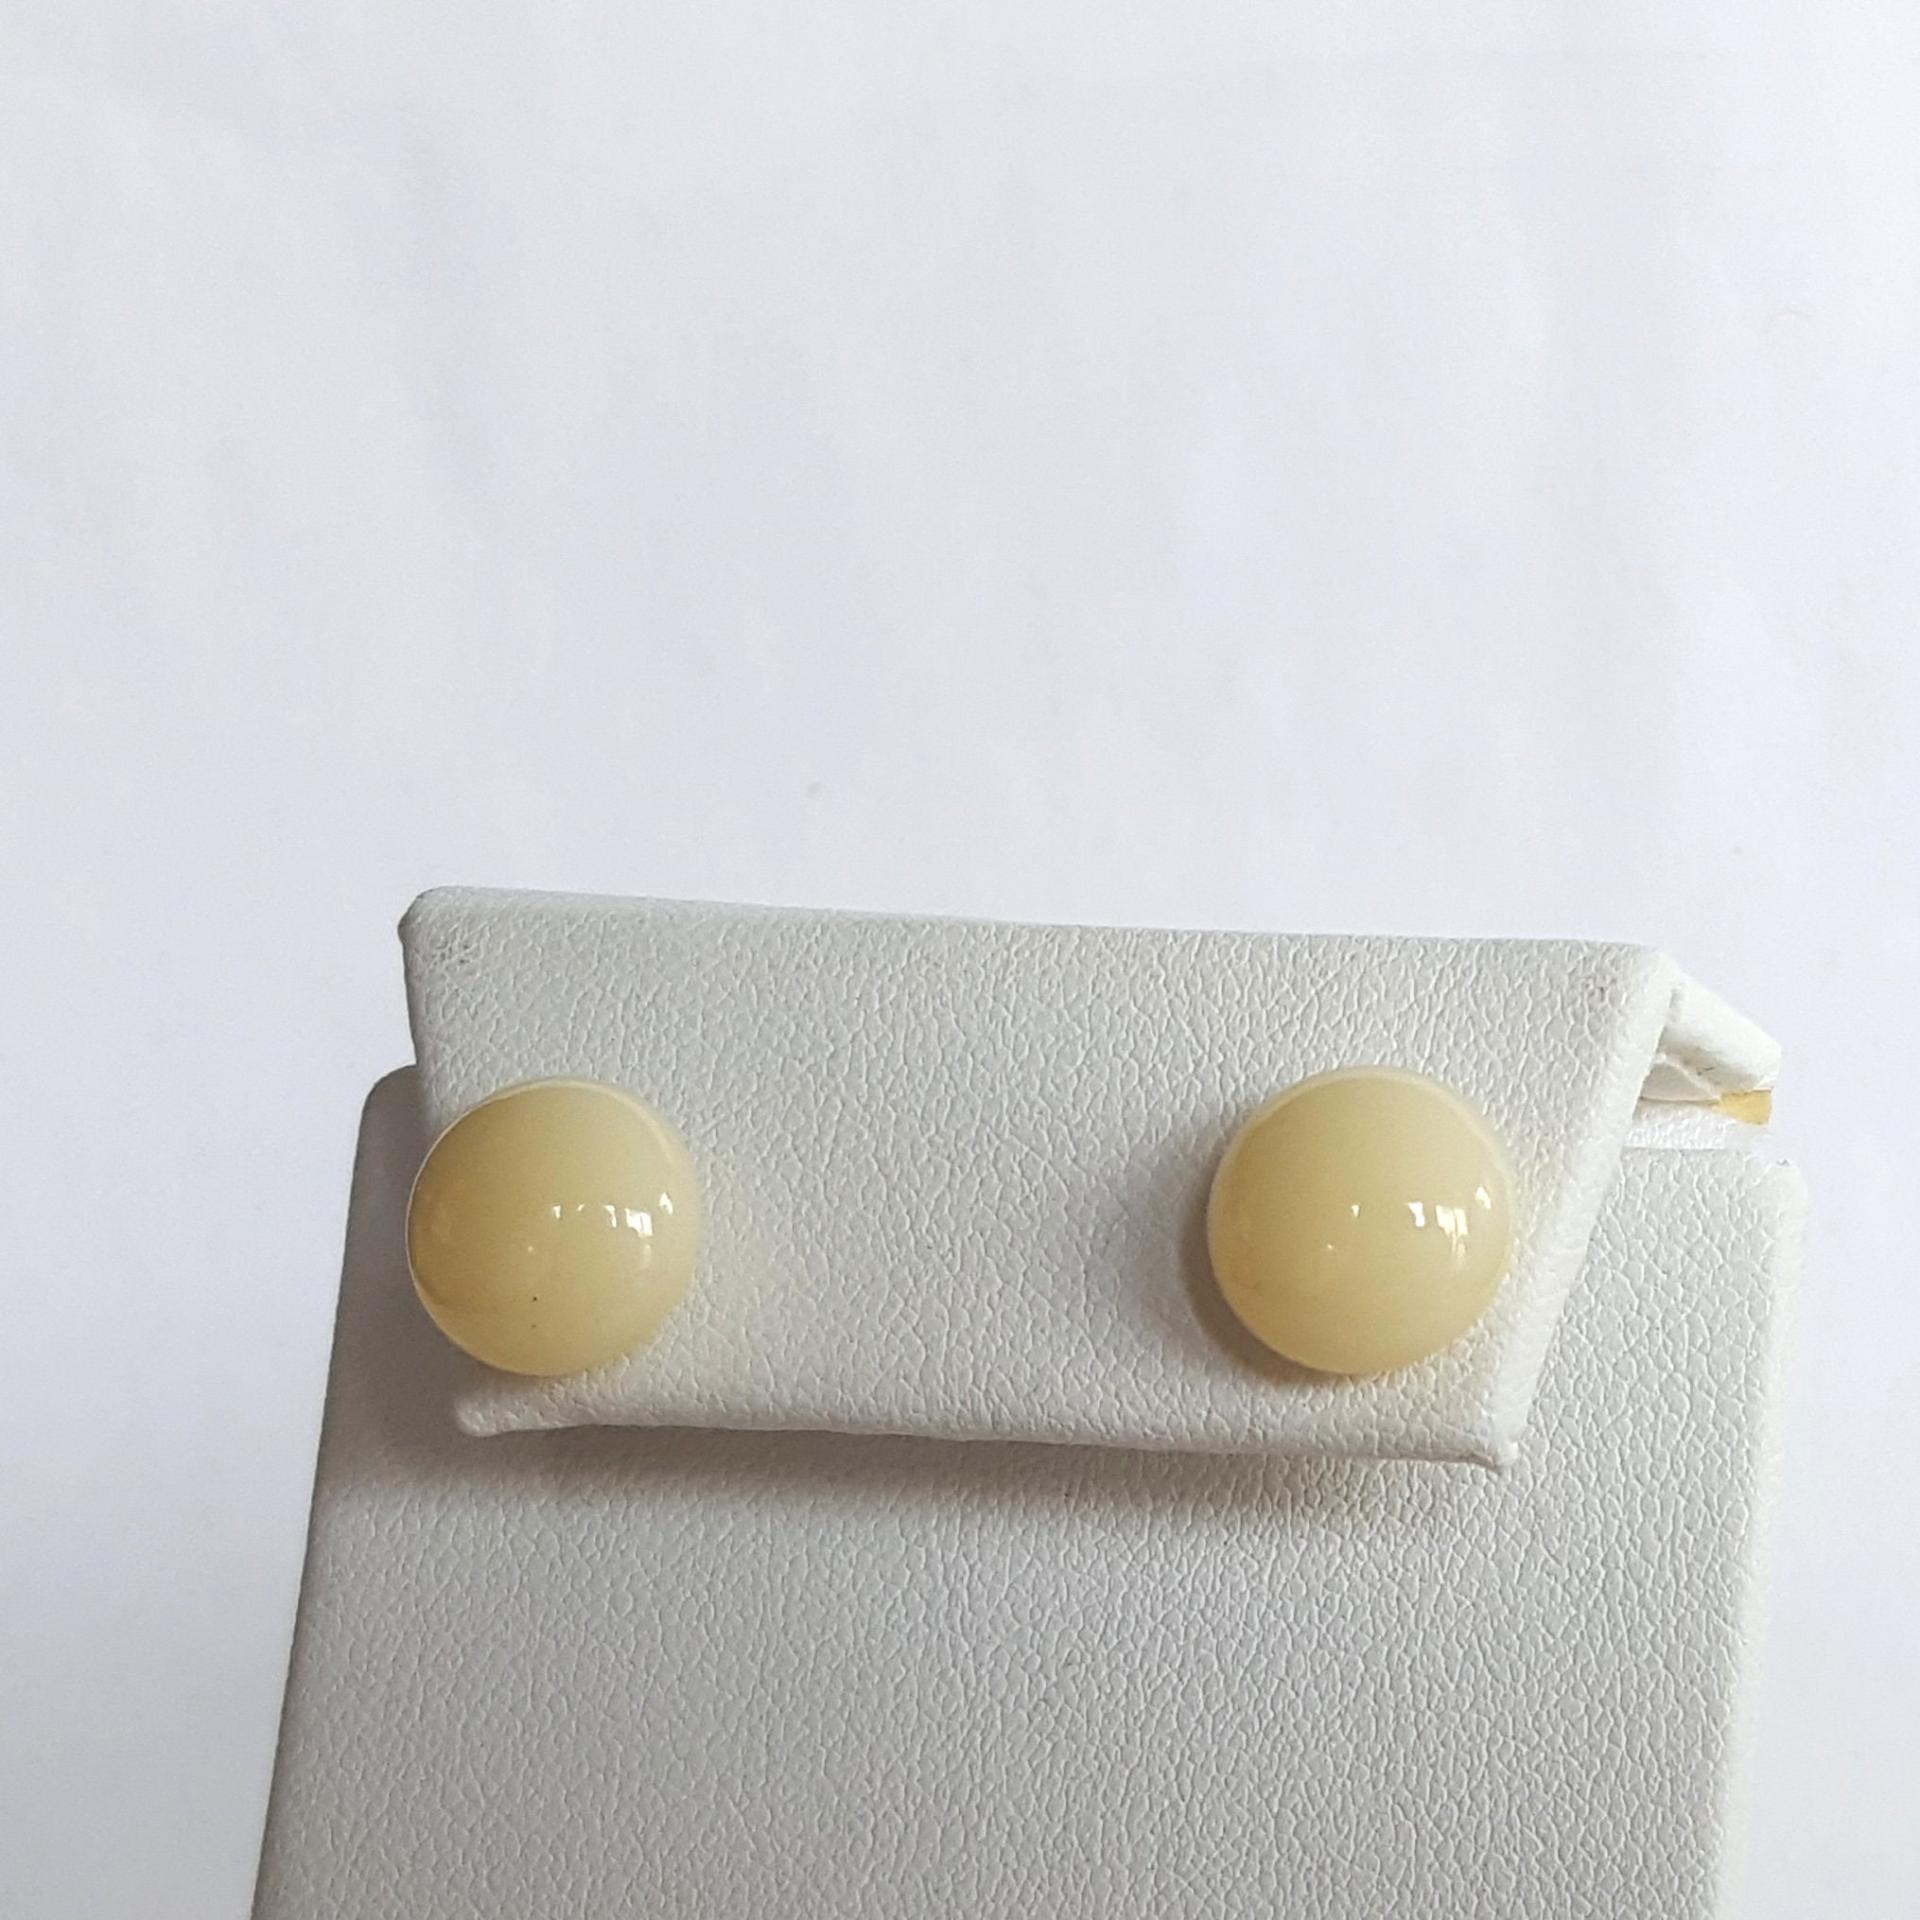 Ivory Stud Earrings, Sterling Silver Posts, Fused Glass